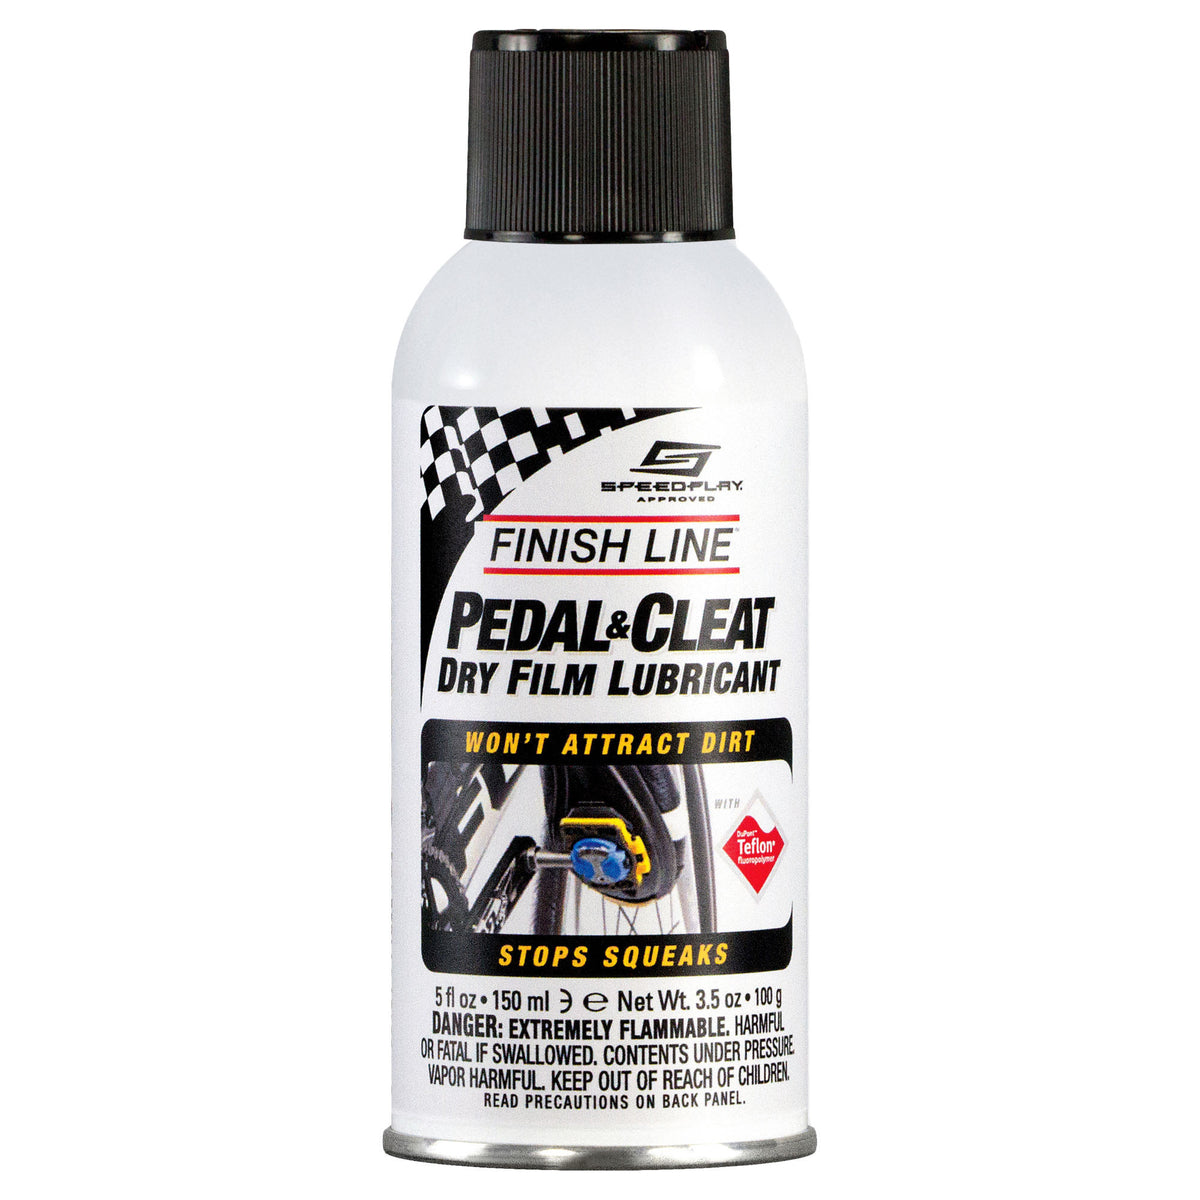 Finish Line Pedal & Cleat Dry Film Lubricant